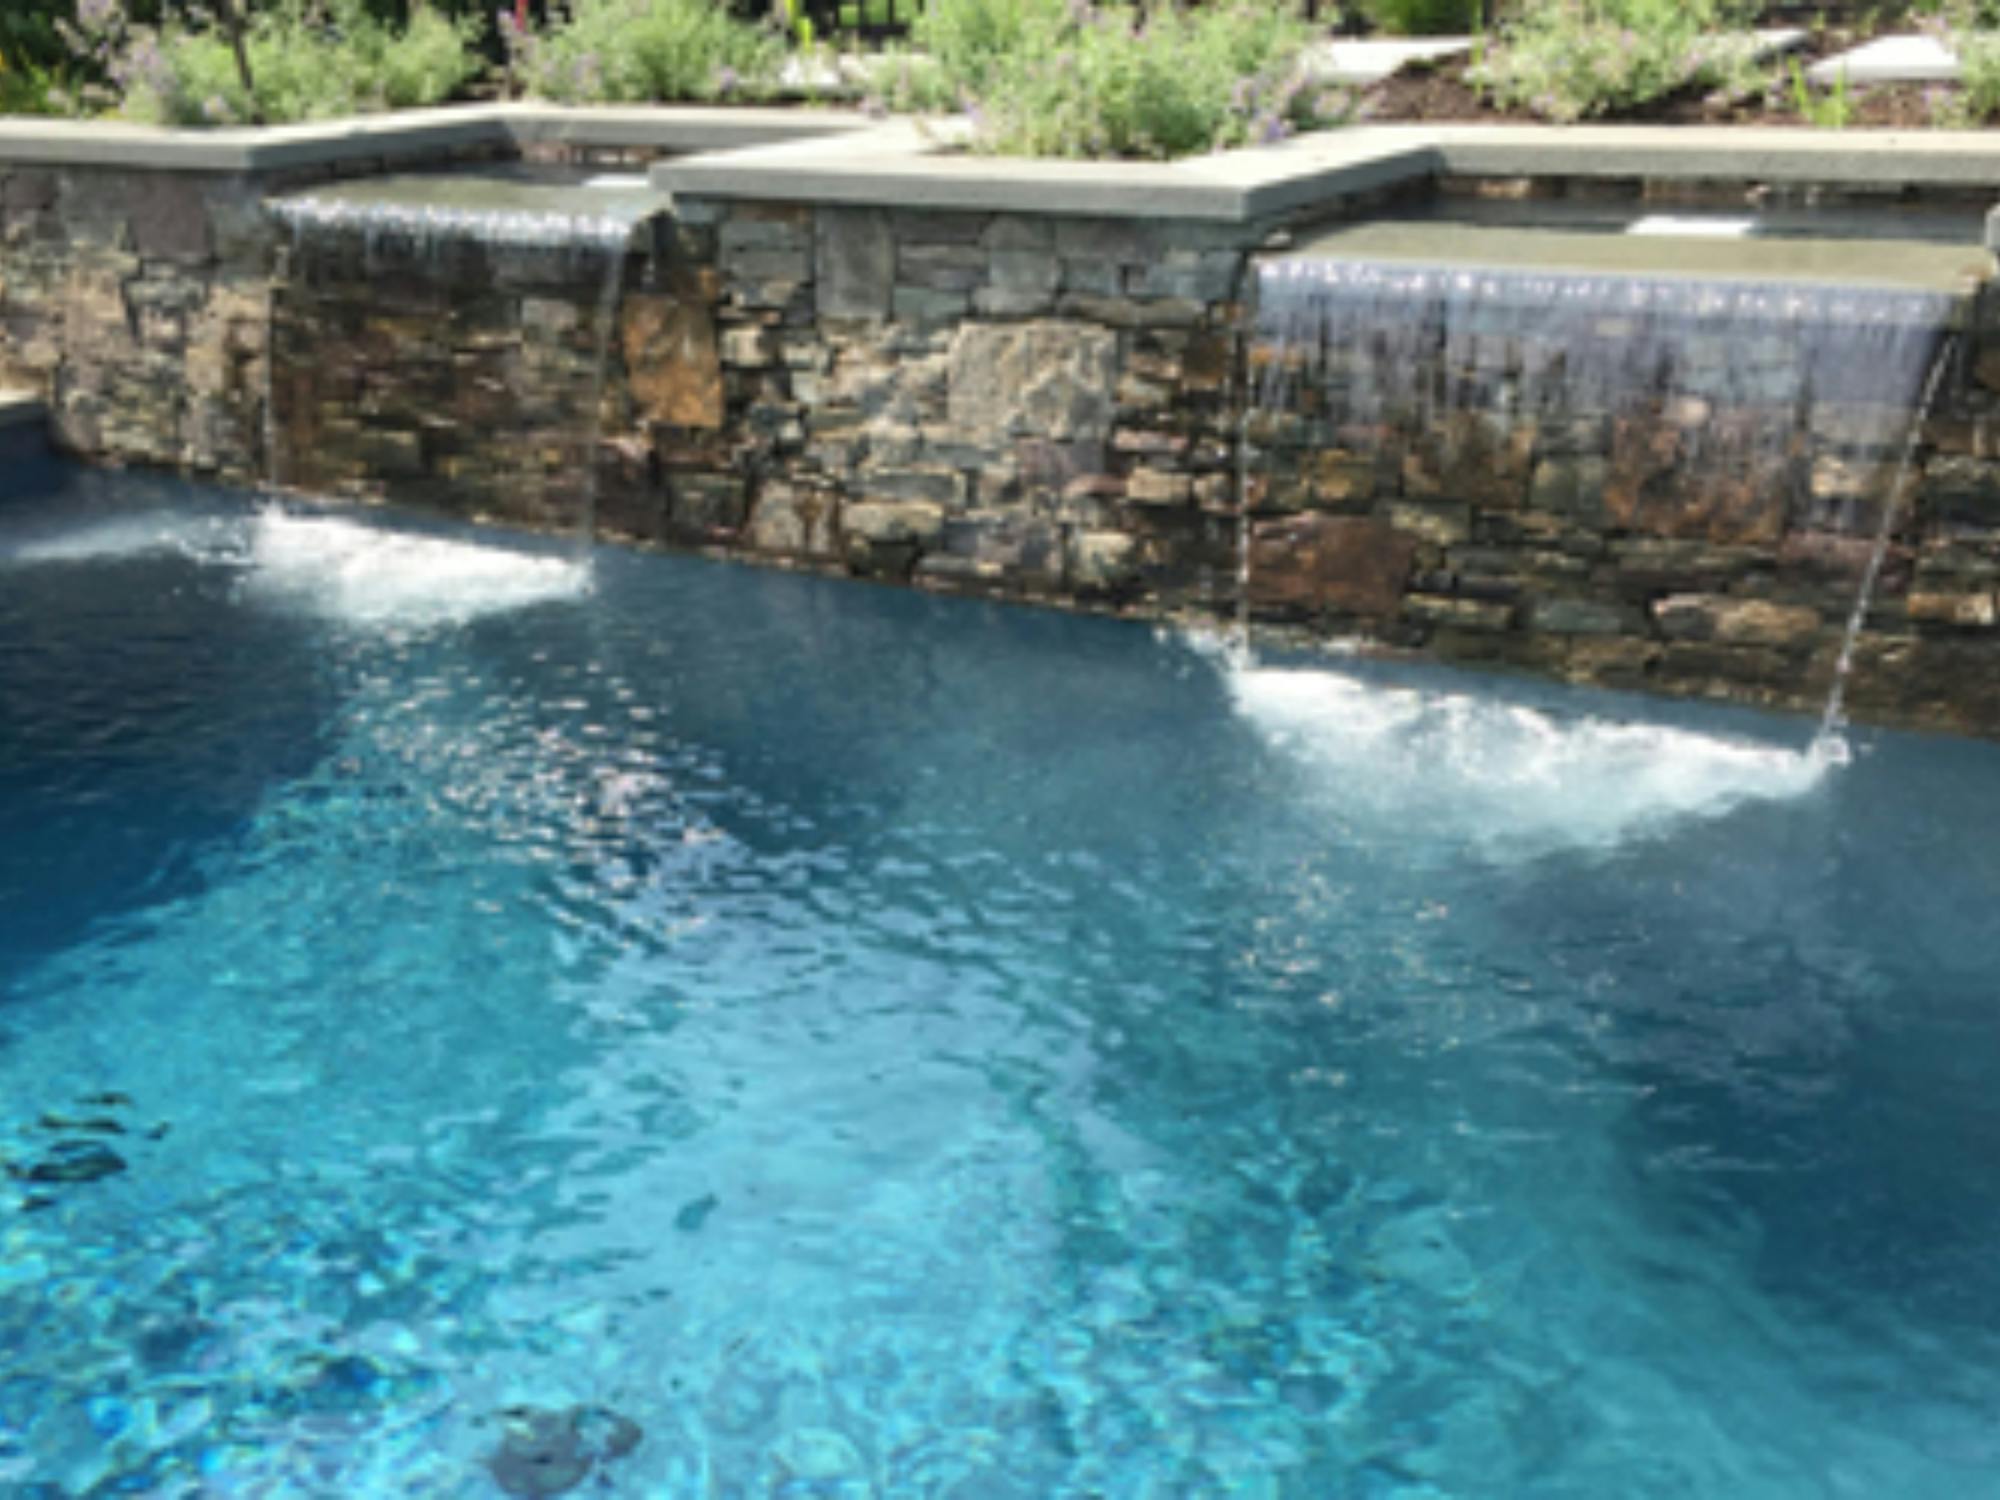 Pool Water Features, Whats Best For You